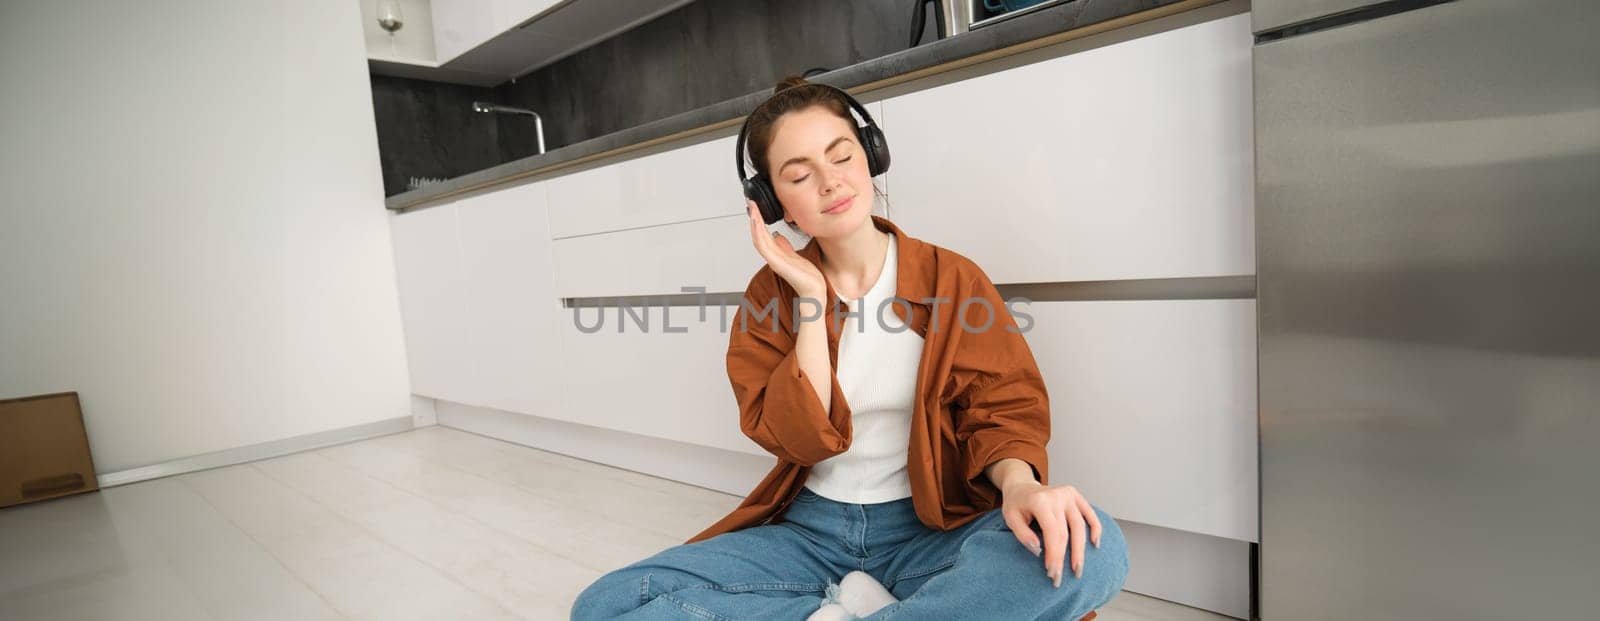 Technology concept. Young smiling brunette woman in wireless headphones, listens to music, sits on kitchen floor.